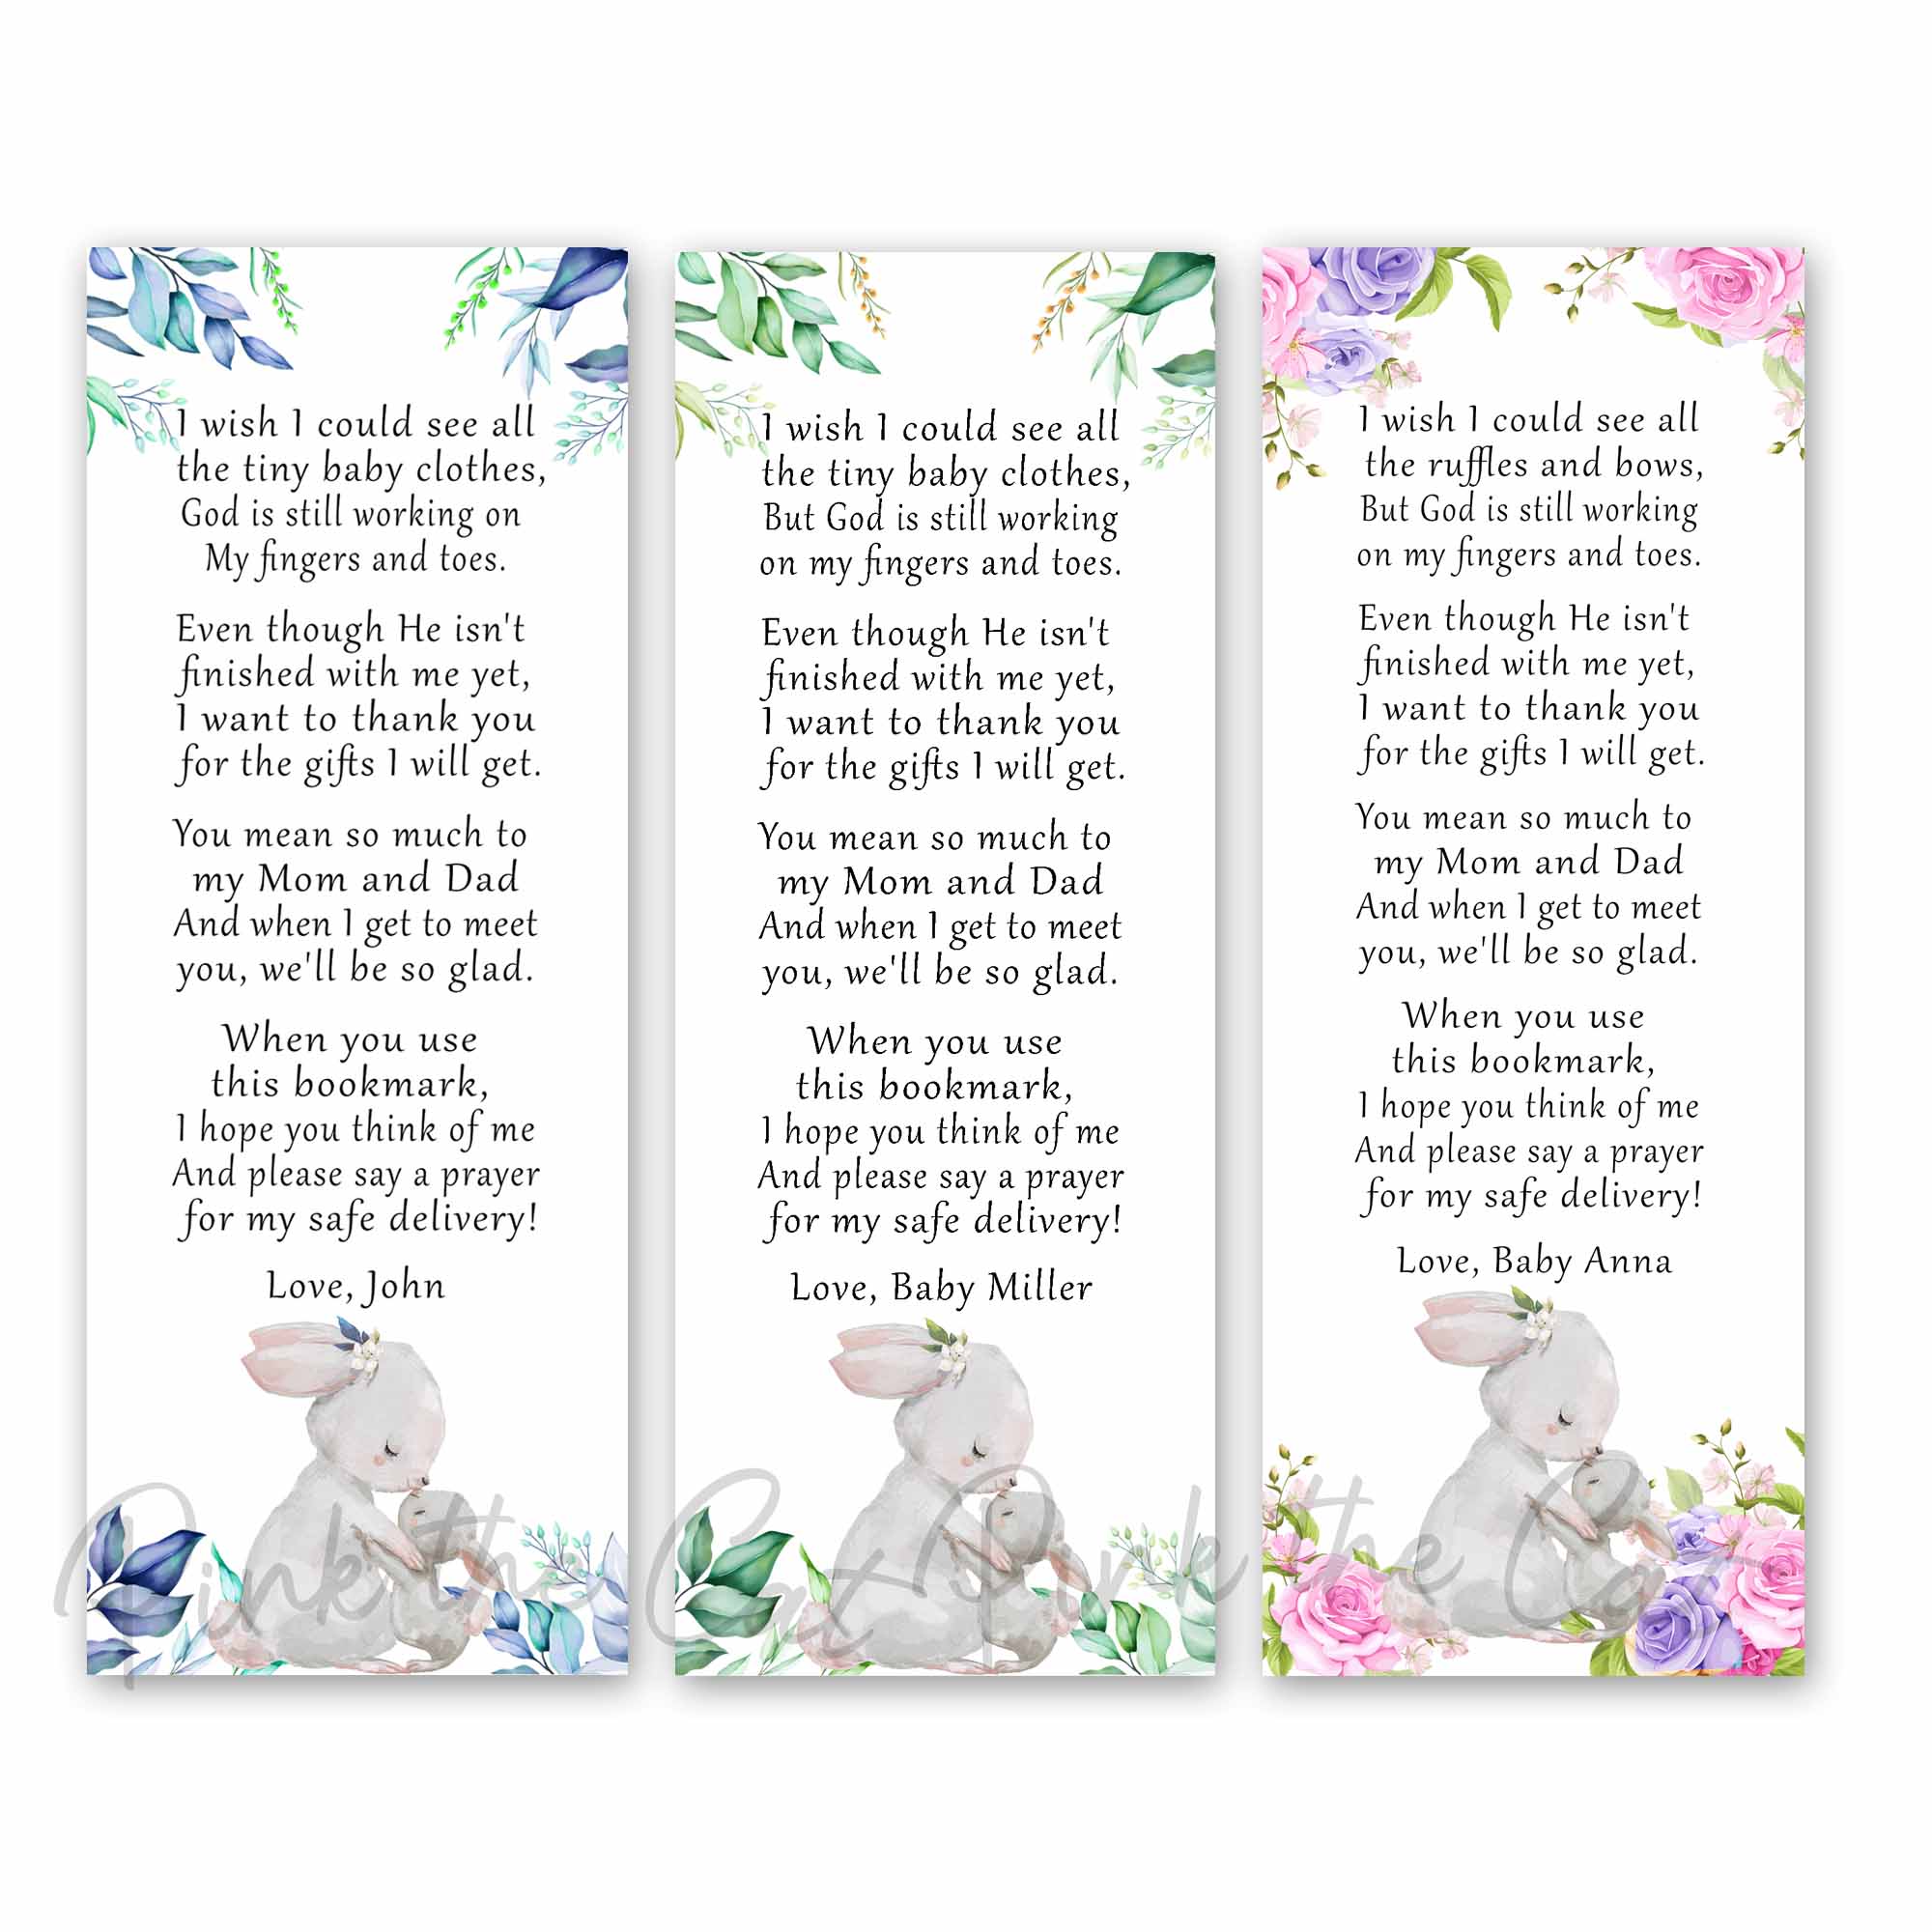 Bunny bookmarks for baby shower